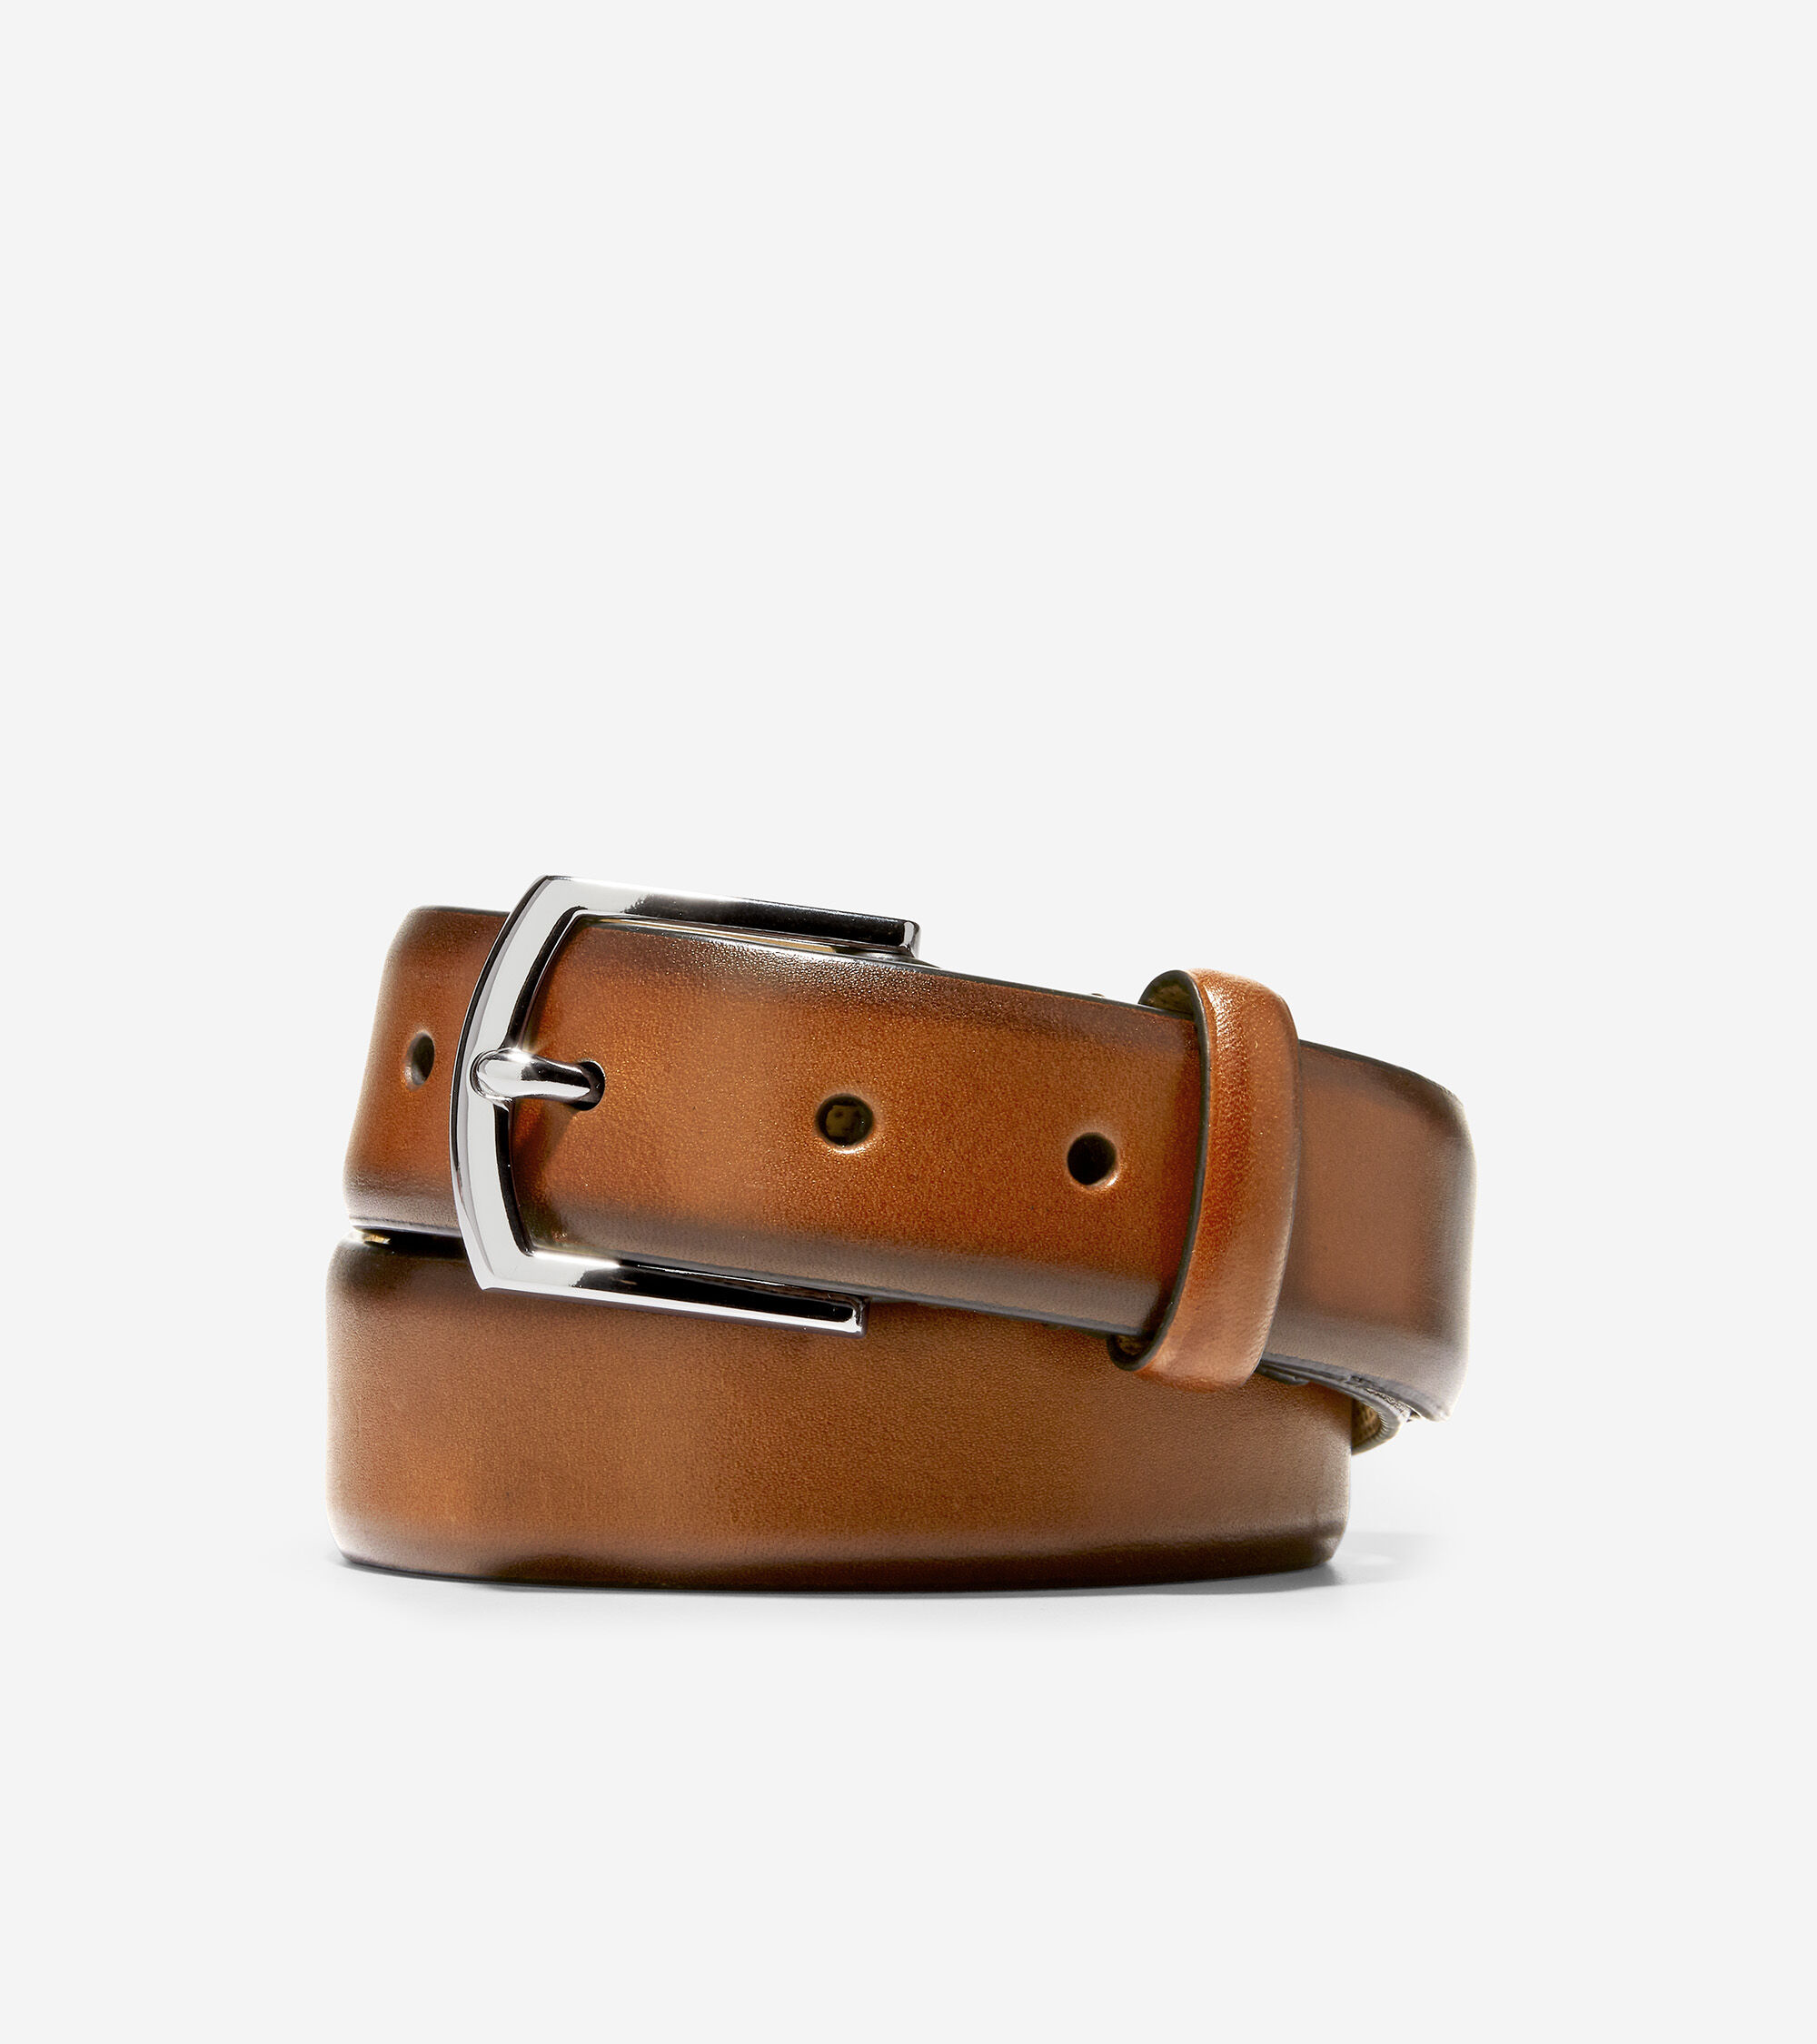 Men's Leather Belt in Tan Light Brown Made with Real Leather ASK FOR SIZE